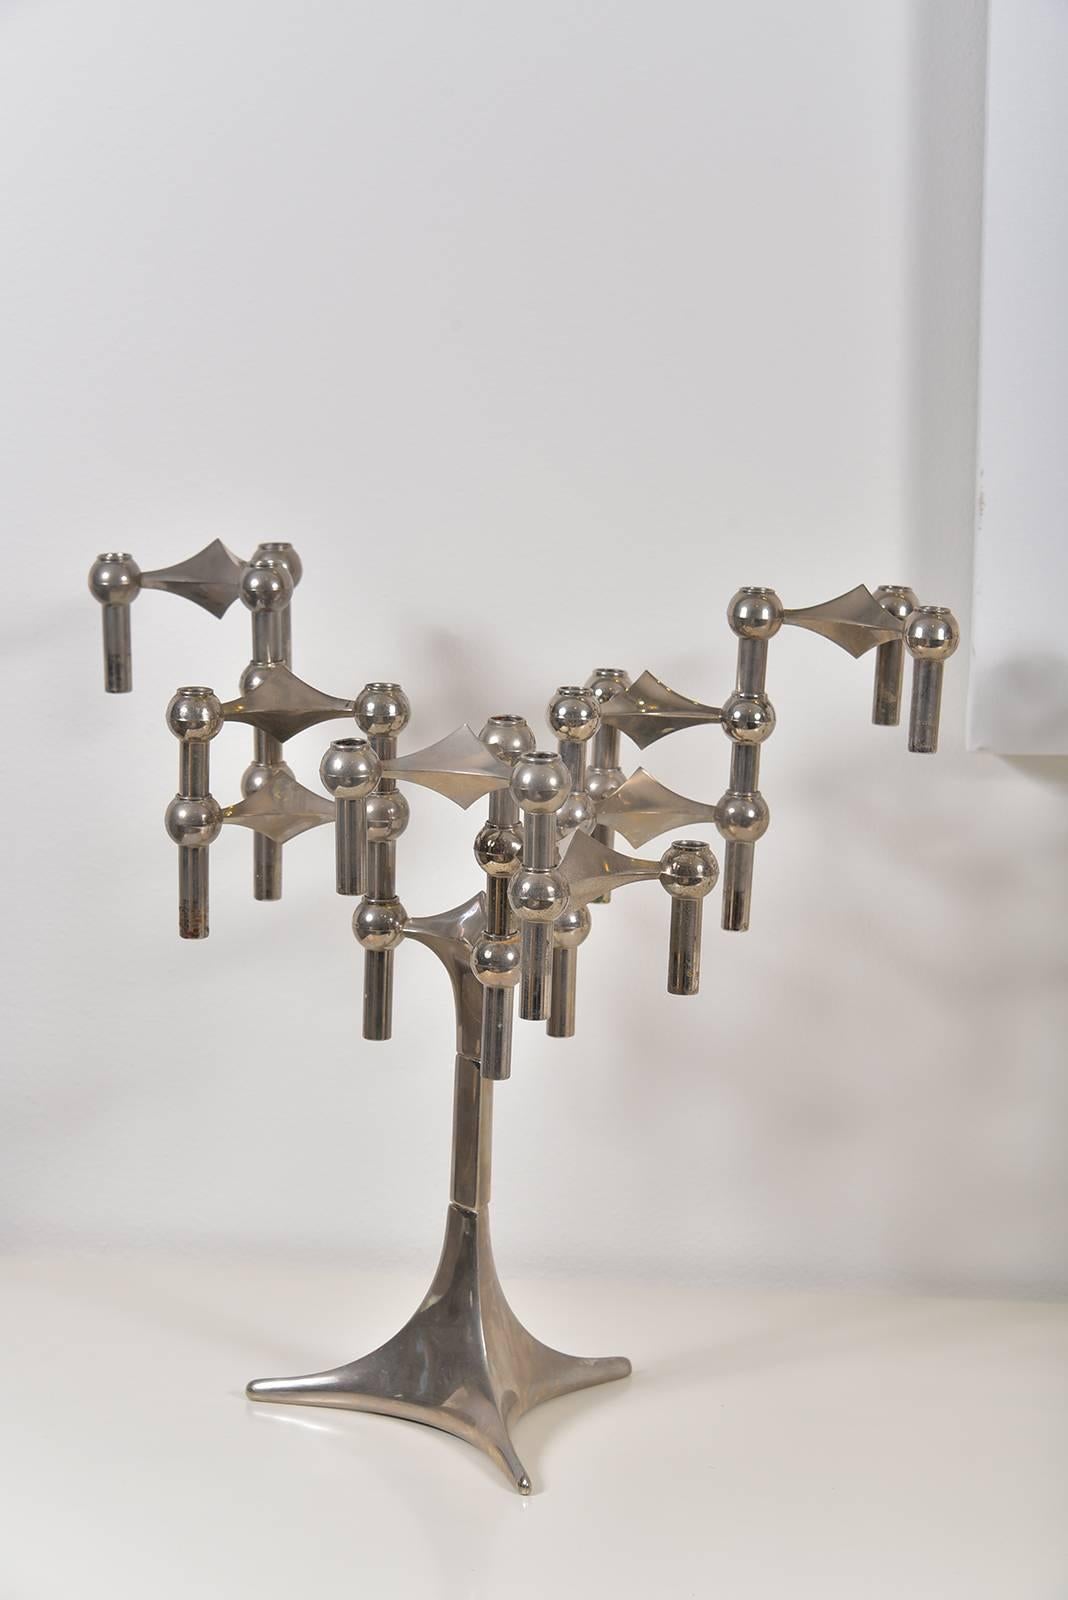 A beautiful pair of French, 1940s French silvered bronze candelabras. A modular design easily manipulated into many kinds of different configurations.